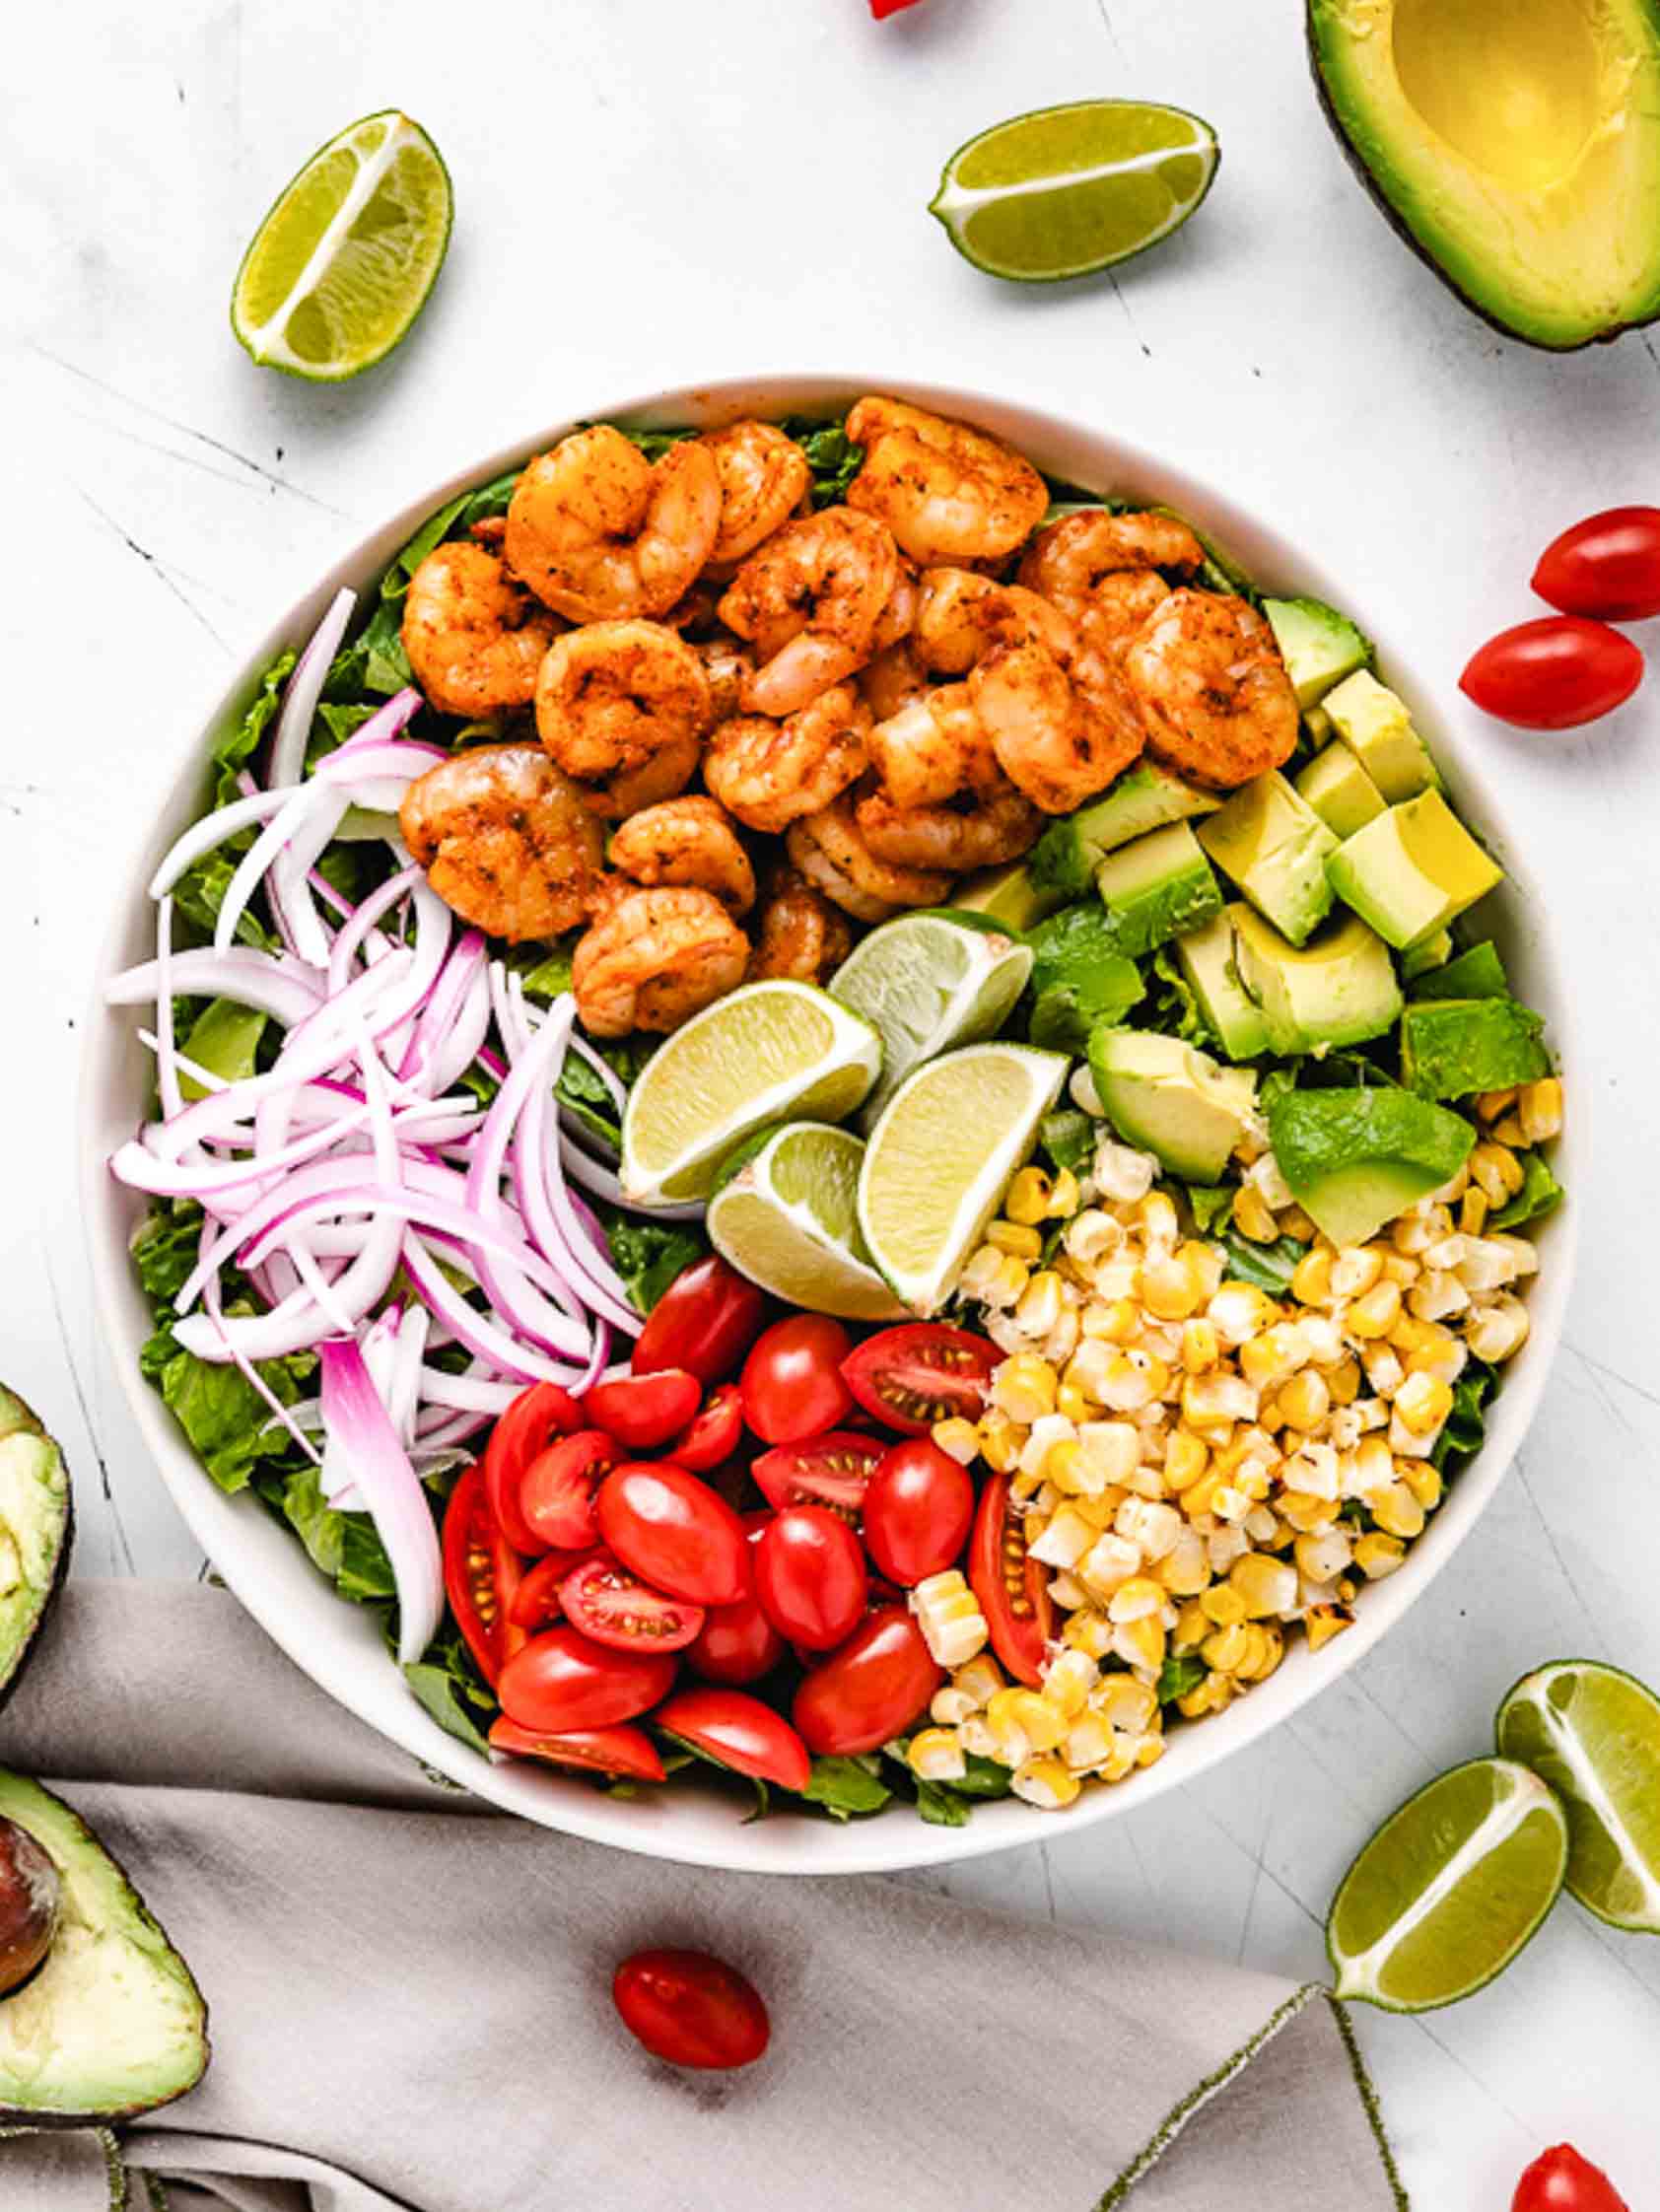 Shrimp, tomatoes, corn, lettuce, avocado, and onions in a bowl.